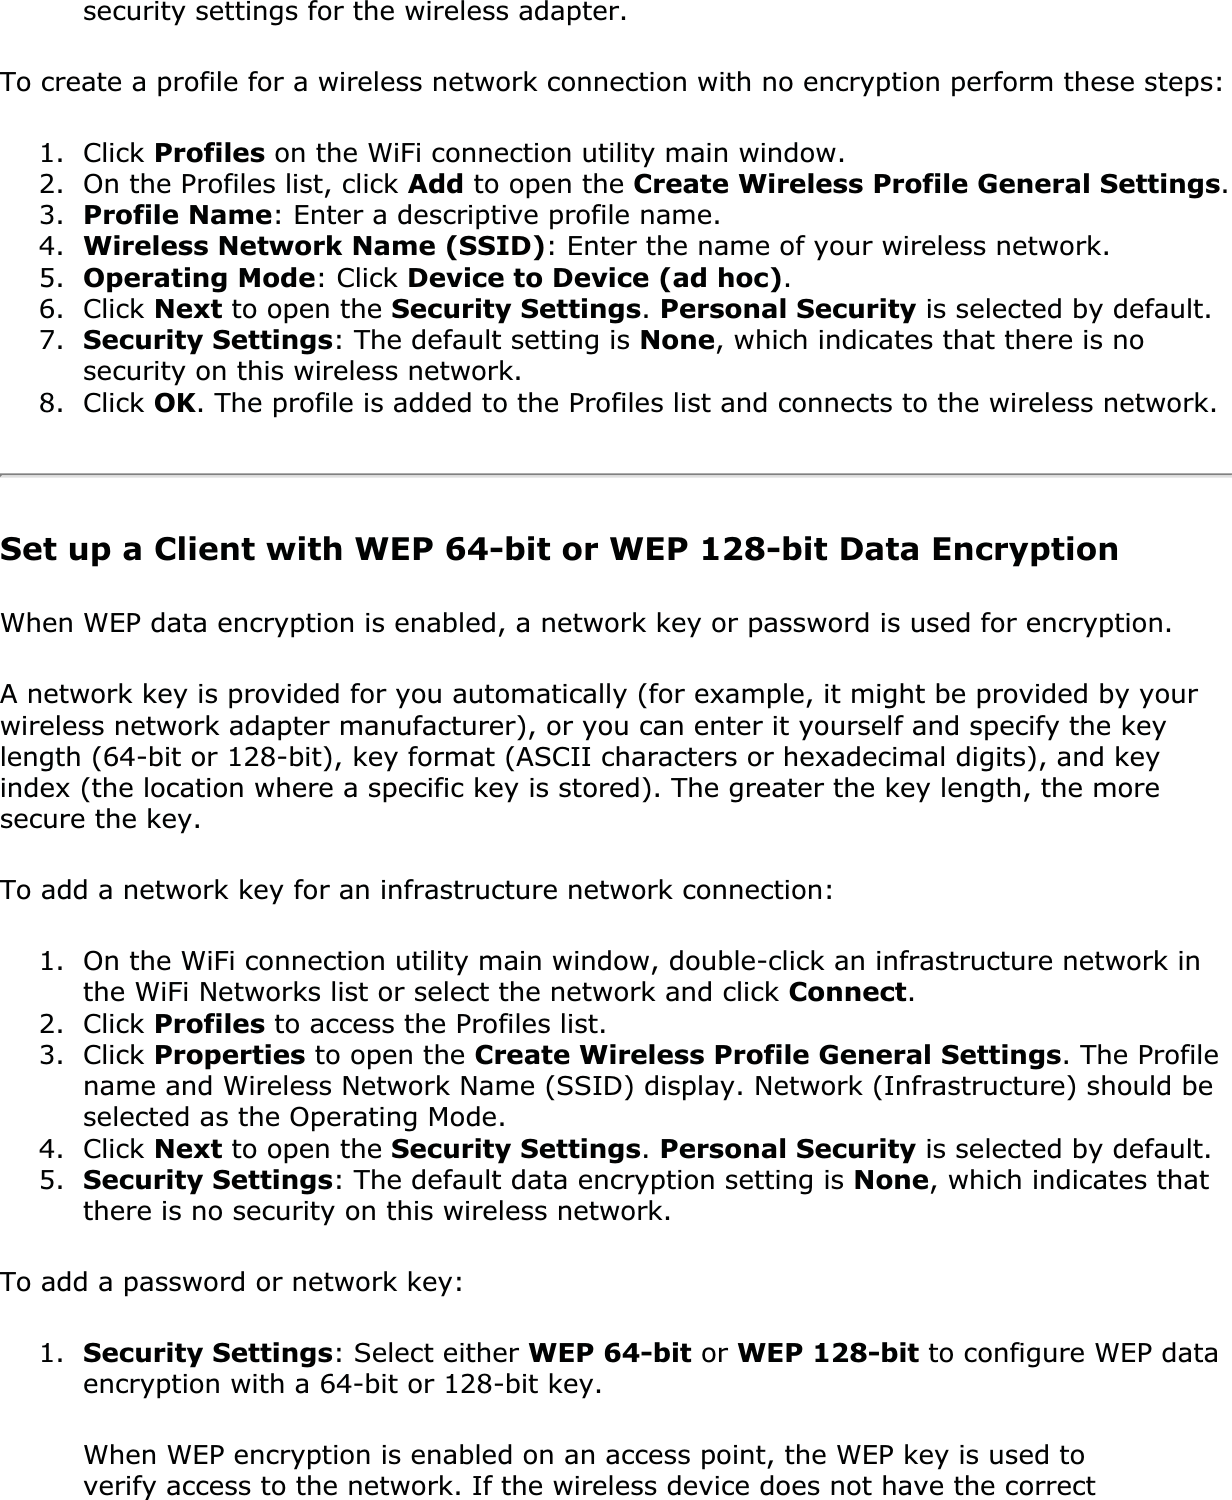 security settings for the wireless adapter.To create a profile for a wireless network connection with no encryption perform these steps:1. Click Profiles on the WiFi connection utility main window.2. On the Profiles list, click Add to open the Create Wireless Profile General Settings.3. Profile Name: Enter a descriptive profile name.4. Wireless Network Name (SSID): Enter the name of your wireless network.5. Operating Mode: Click Device to Device (ad hoc).6. Click Next to open the Security Settings.Personal Security is selected by default.7. Security Settings: The default setting is None, which indicates that there is no security on this wireless network.8. Click OK. The profile is added to the Profiles list and connects to the wireless network.Set up a Client with WEP 64-bit or WEP 128-bit Data EncryptionWhen WEP data encryption is enabled, a network key or password is used for encryption.A network key is provided for you automatically (for example, it might be provided by your wireless network adapter manufacturer), or you can enter it yourself and specify the key length (64-bit or 128-bit), key format (ASCII characters or hexadecimal digits), and key index (the location where a specific key is stored). The greater the key length, the more secure the key.To add a network key for an infrastructure network connection:1. On the WiFi connection utility main window, double-click an infrastructure network in the WiFi Networks list or select the network and click Connect.2. Click Profiles to access the Profiles list.3. Click Properties to open the Create Wireless Profile General Settings. The Profile name and Wireless Network Name (SSID) display. Network (Infrastructure) should be selected as the Operating Mode.4. Click Next to open the Security Settings.Personal Security is selected by default. 5. Security Settings: The default data encryption setting is None, which indicates that there is no security on this wireless network.To add a password or network key:1. Security Settings: Select either WEP 64-bit or WEP 128-bit to configure WEP data encryption with a 64-bit or 128-bit key.When WEP encryption is enabled on an access point, the WEP key is used to verify access to the network. If the wireless device does not have the correct 